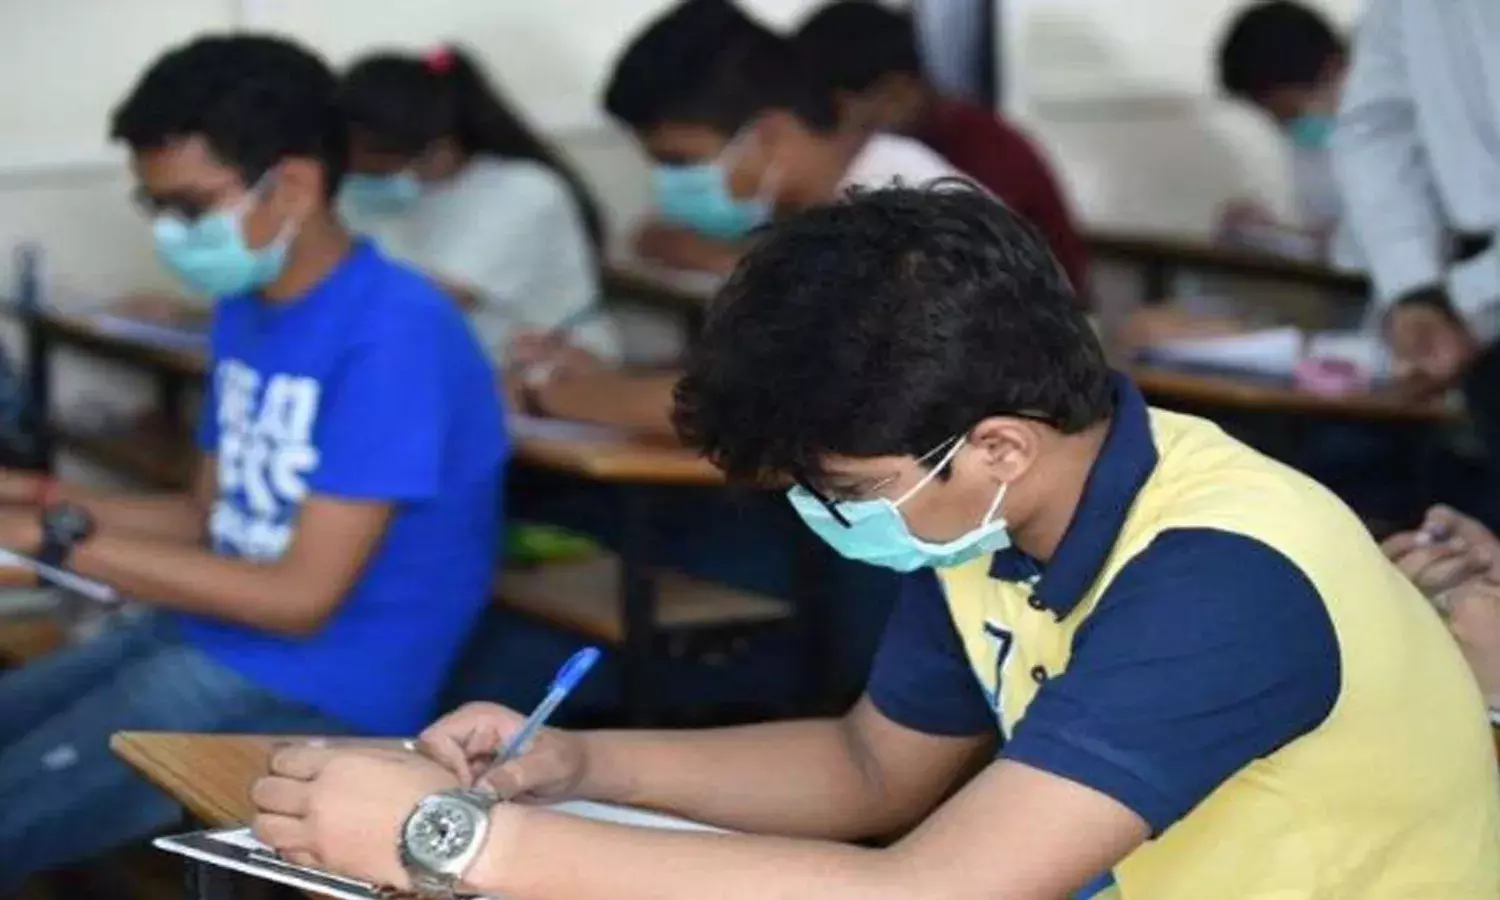 Postpone all offline exams scheduled for this month: Education Ministry